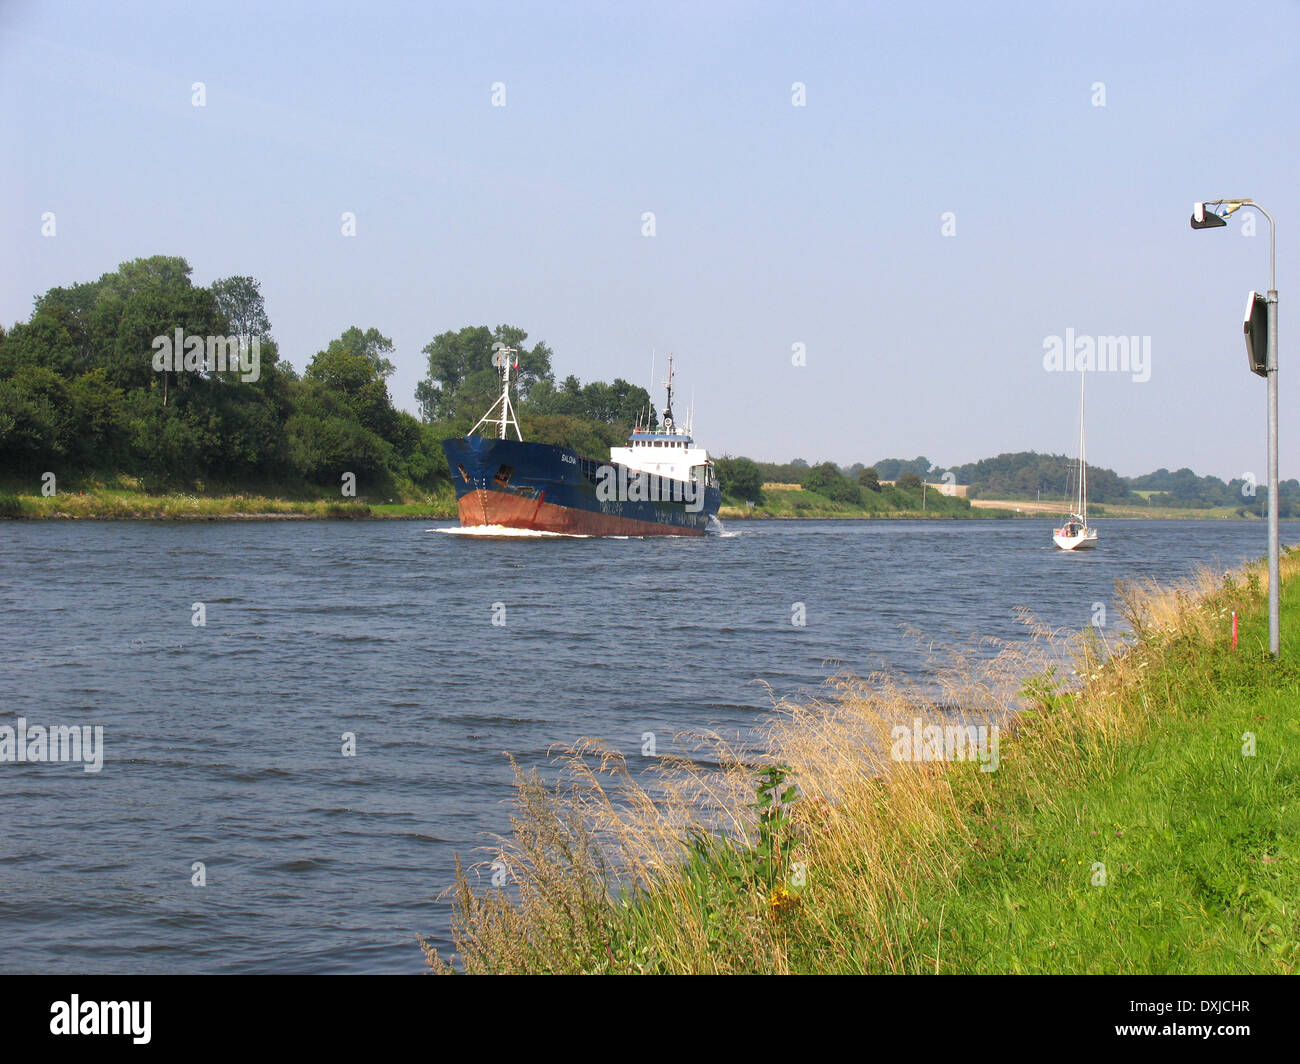 The Kiel Canal. The Kiel Canal connects the North Sea with the Baltic Sea (Kiel Fjord). This waterway is the most frequented artificial waterway in the world based on the number of ships. Photo: Klaus Nowottnick Date: August 07, 2007 Stock Photo